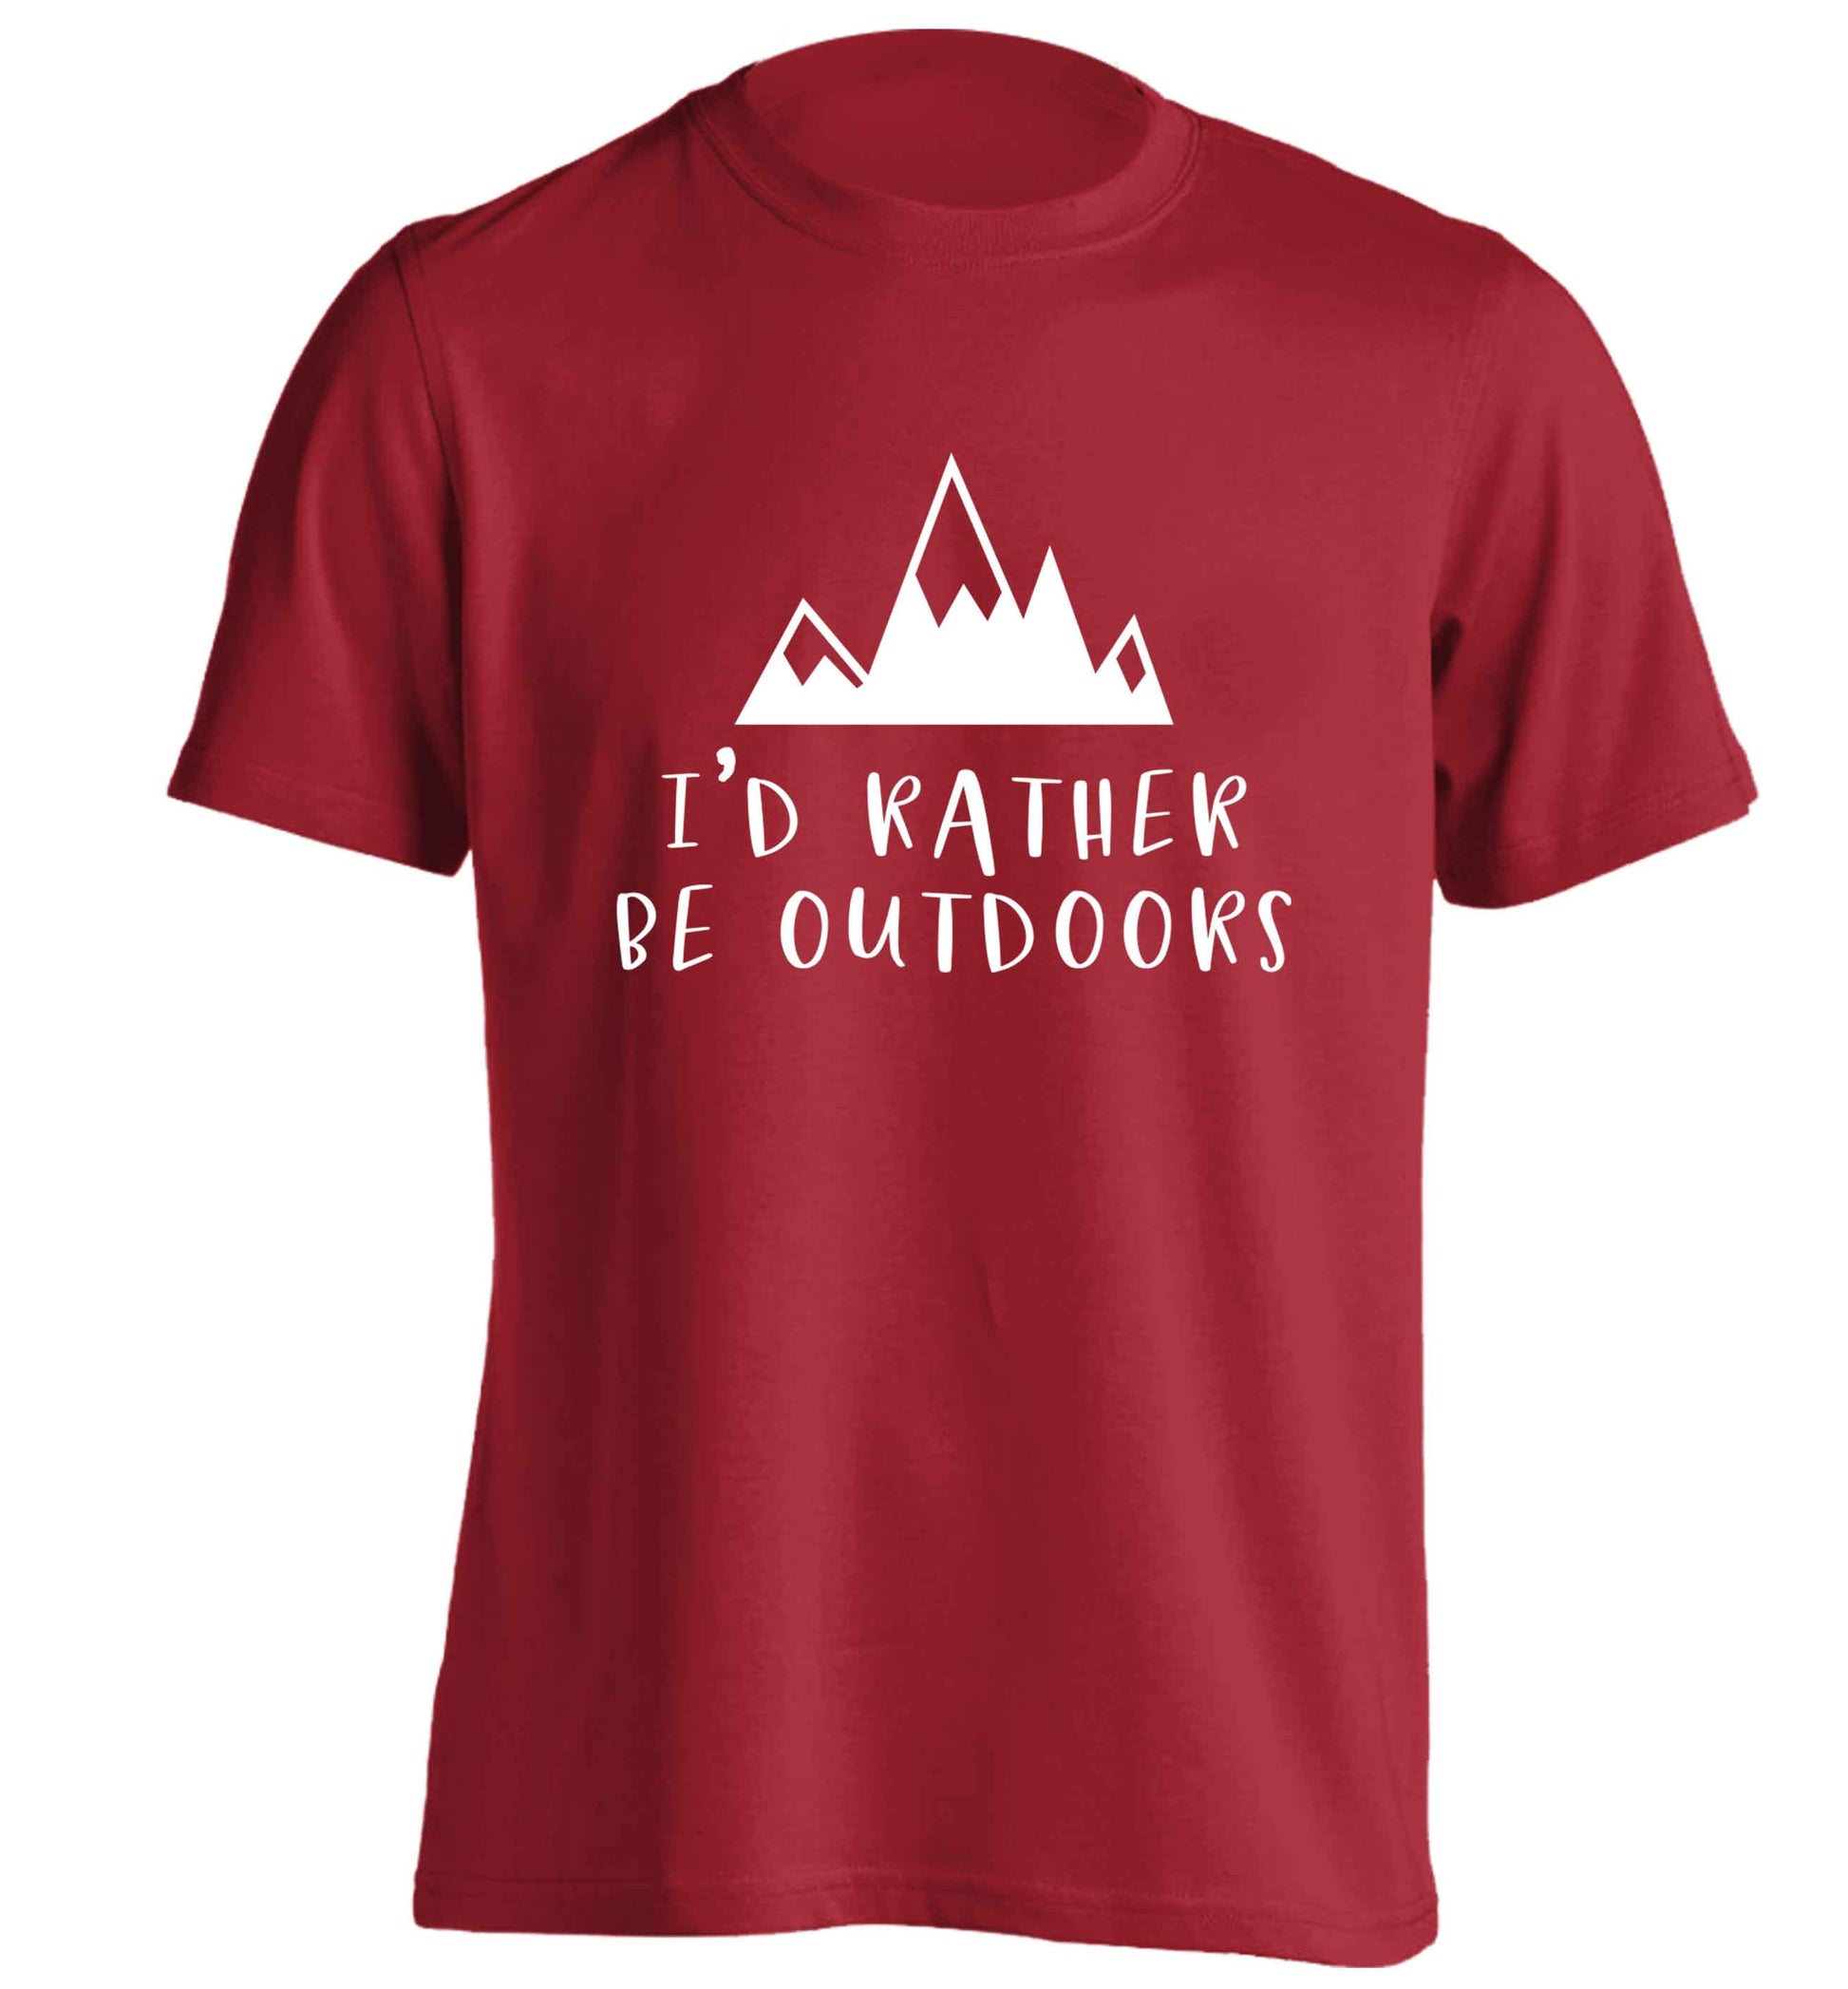 I'd rather be outdoors adults unisex red Tshirt 2XL